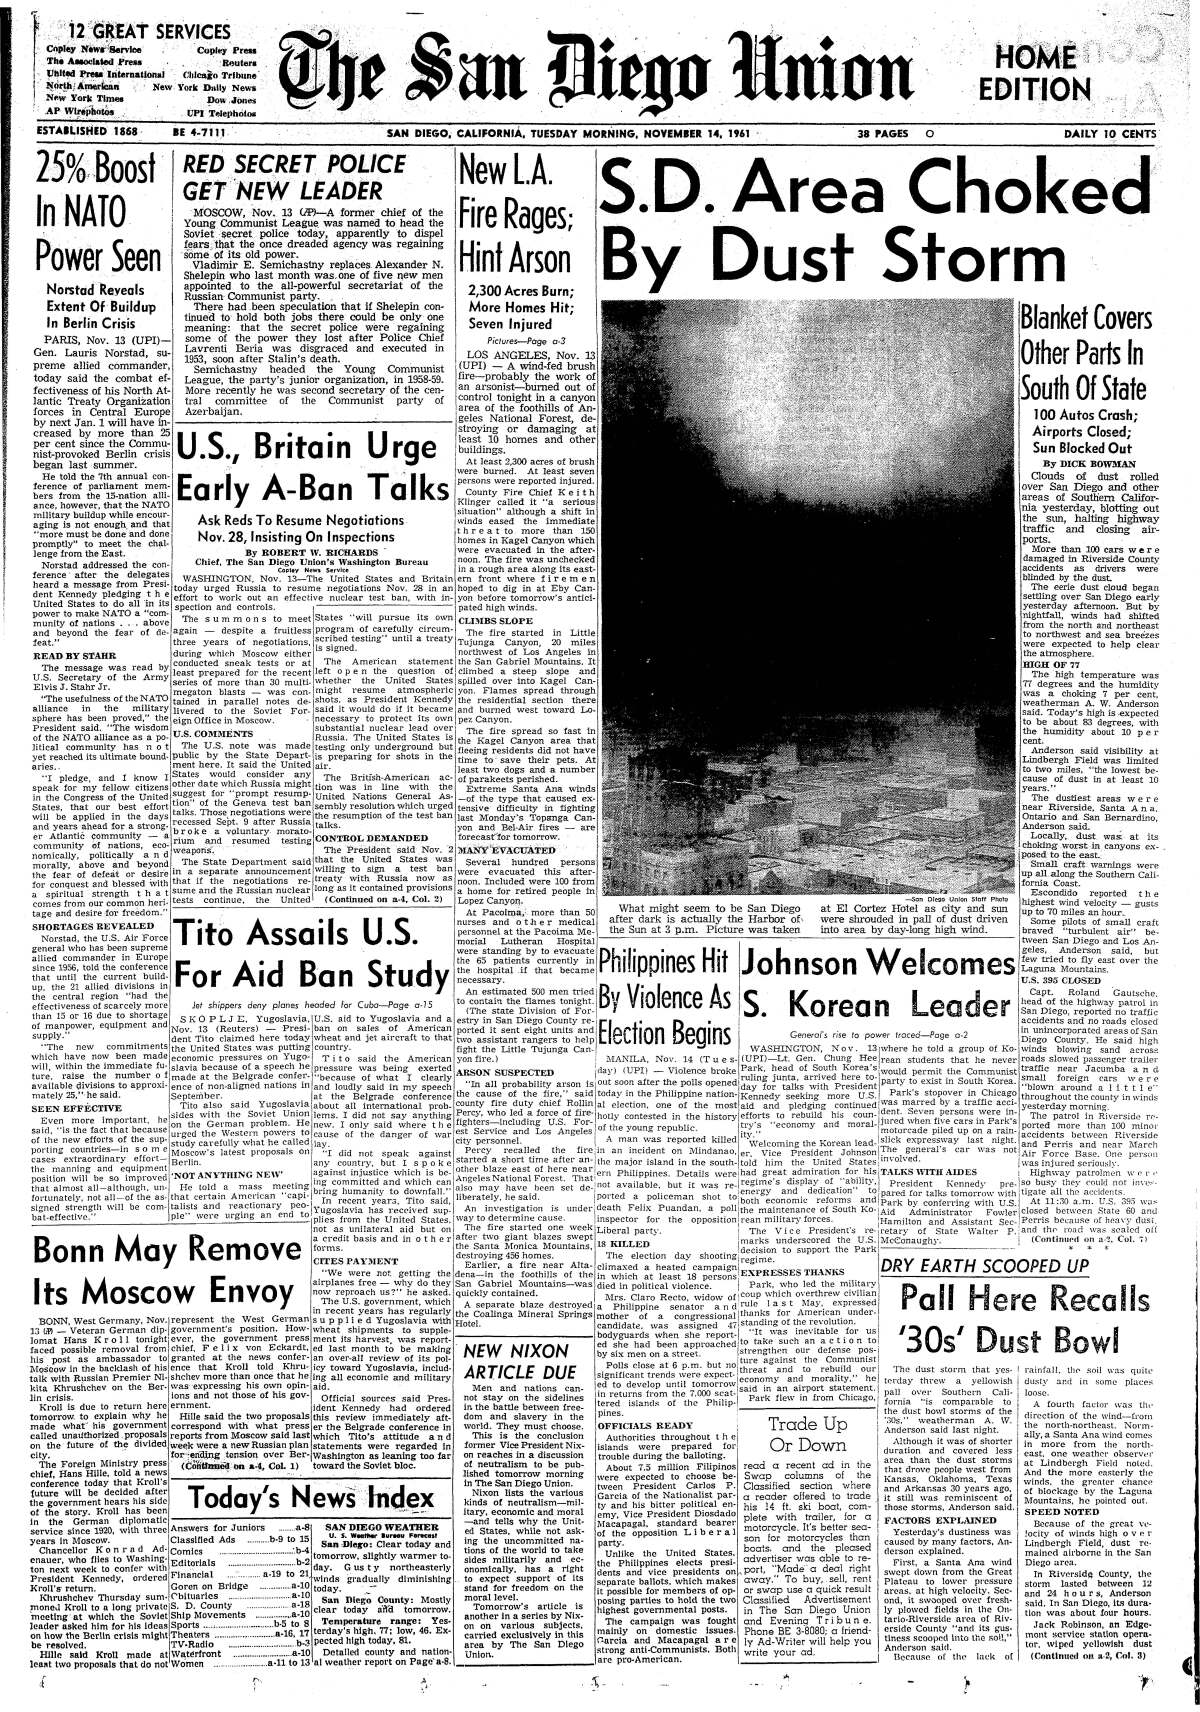 A massive dust storm was reported on the front page of The San Diego Union, Nov. 14, 1961.